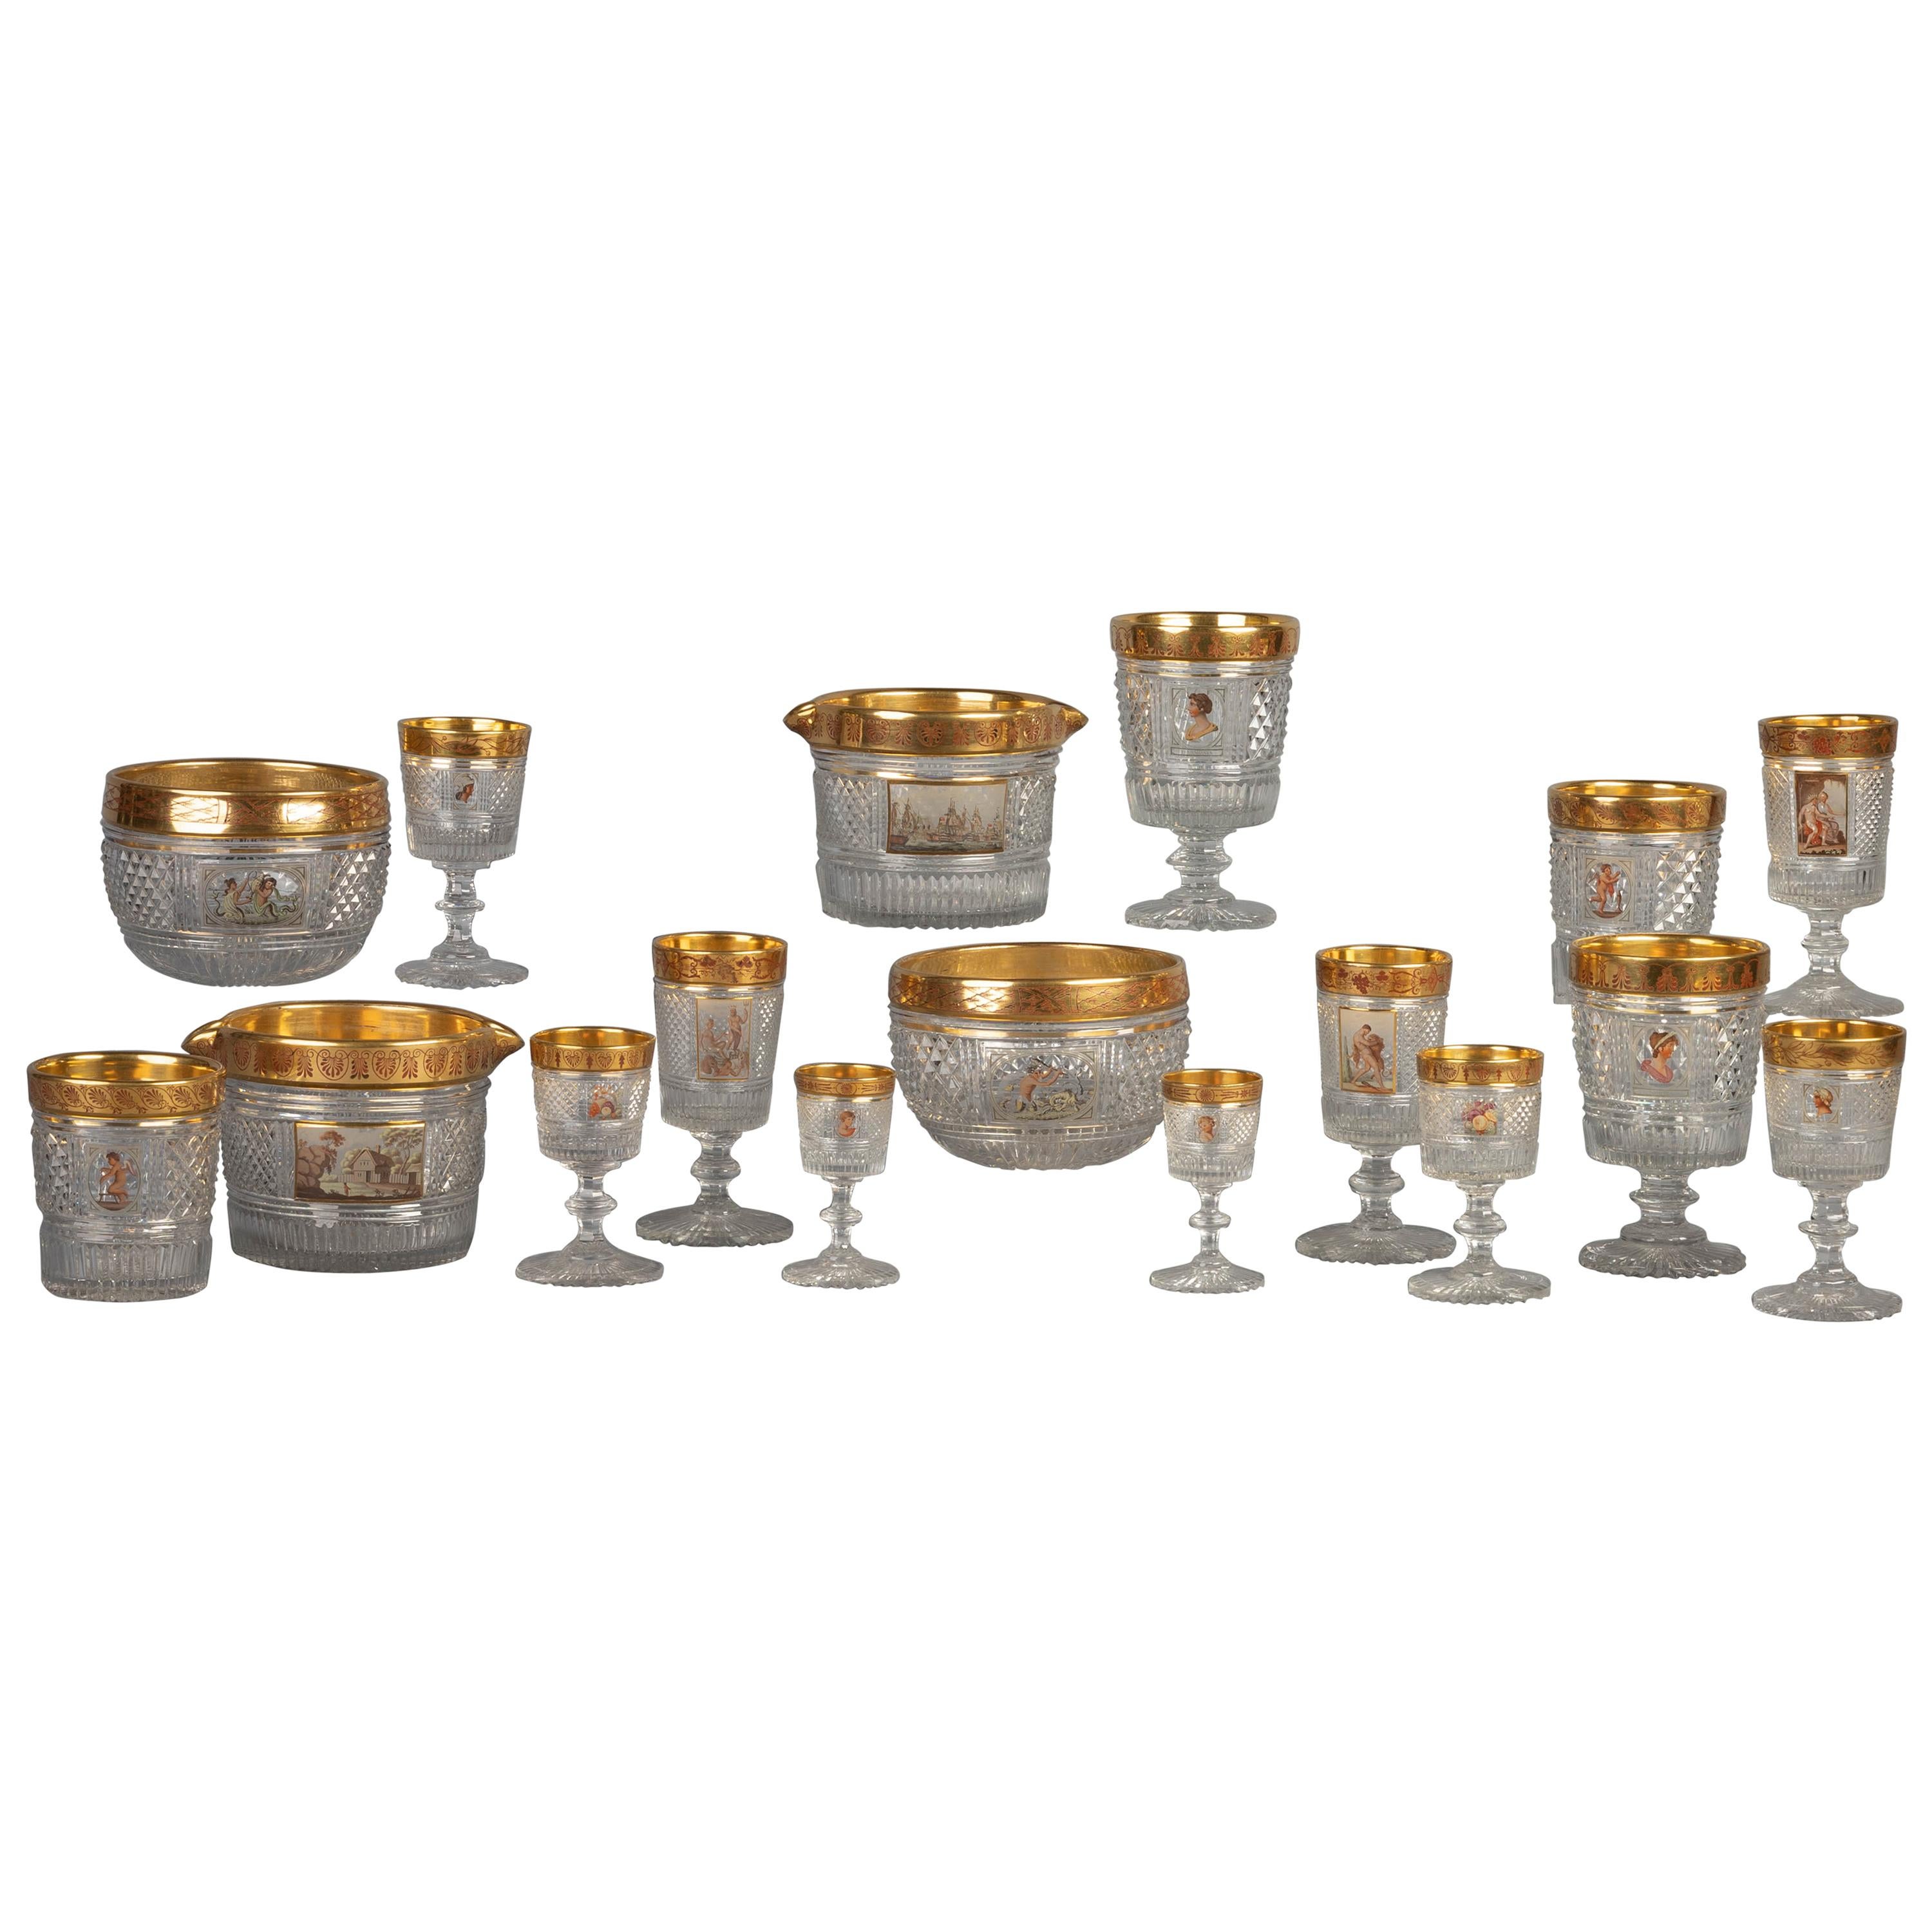 Extensive English Faceted and Enameled and Gilt Glass Service, circa 1815 For Sale